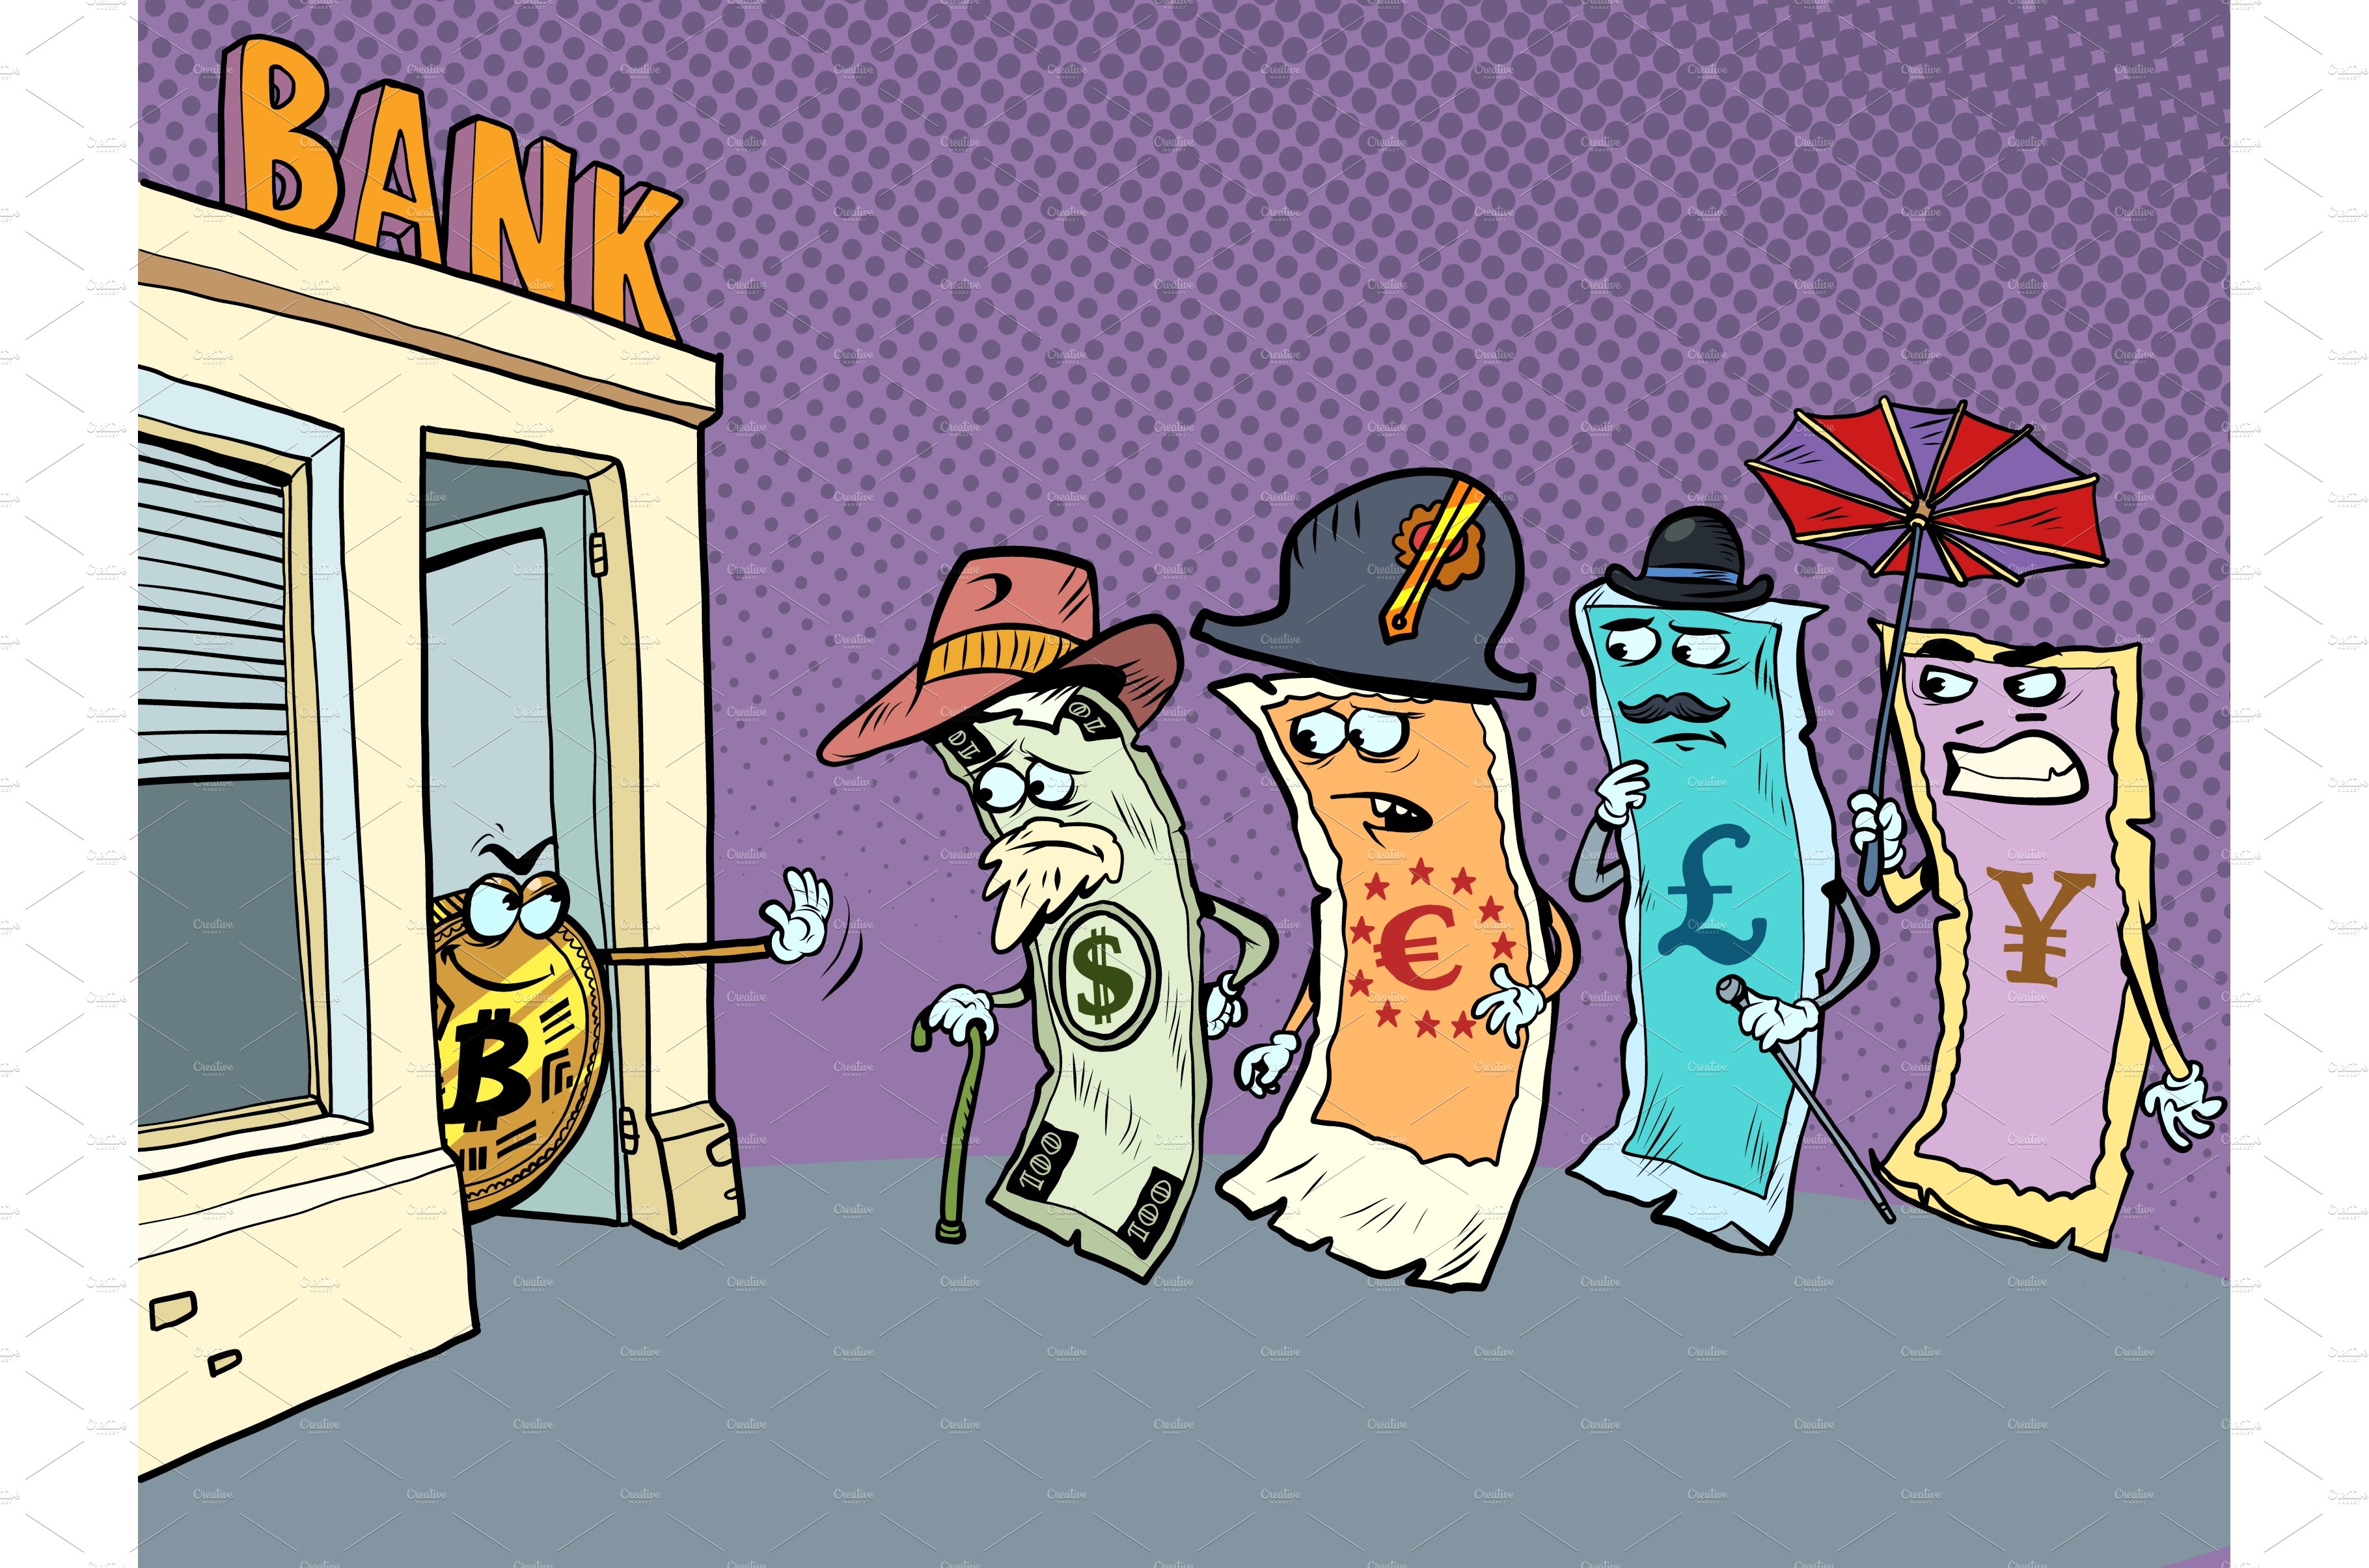 A group of cartoon characters standing in front of a bank.